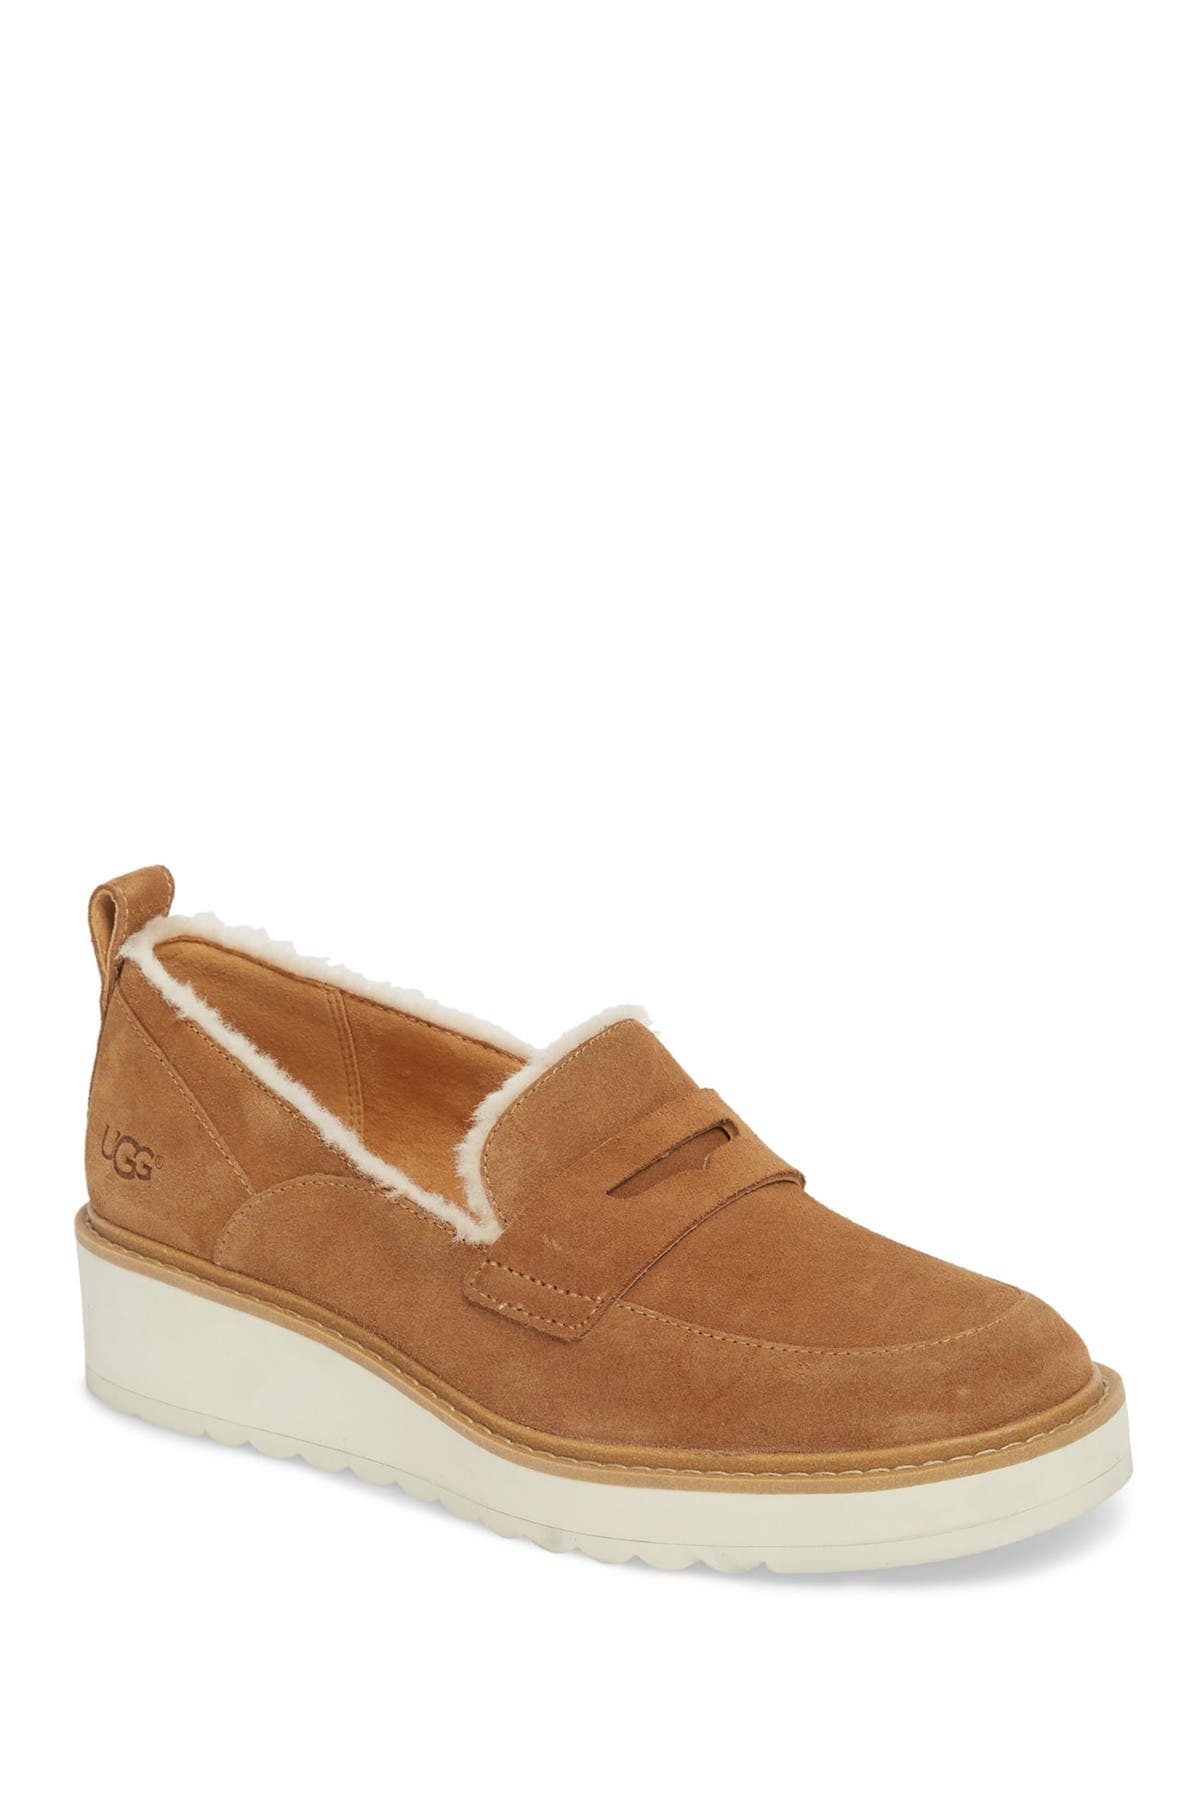 UGG | (R) Atwater Spill Seam Wedge 